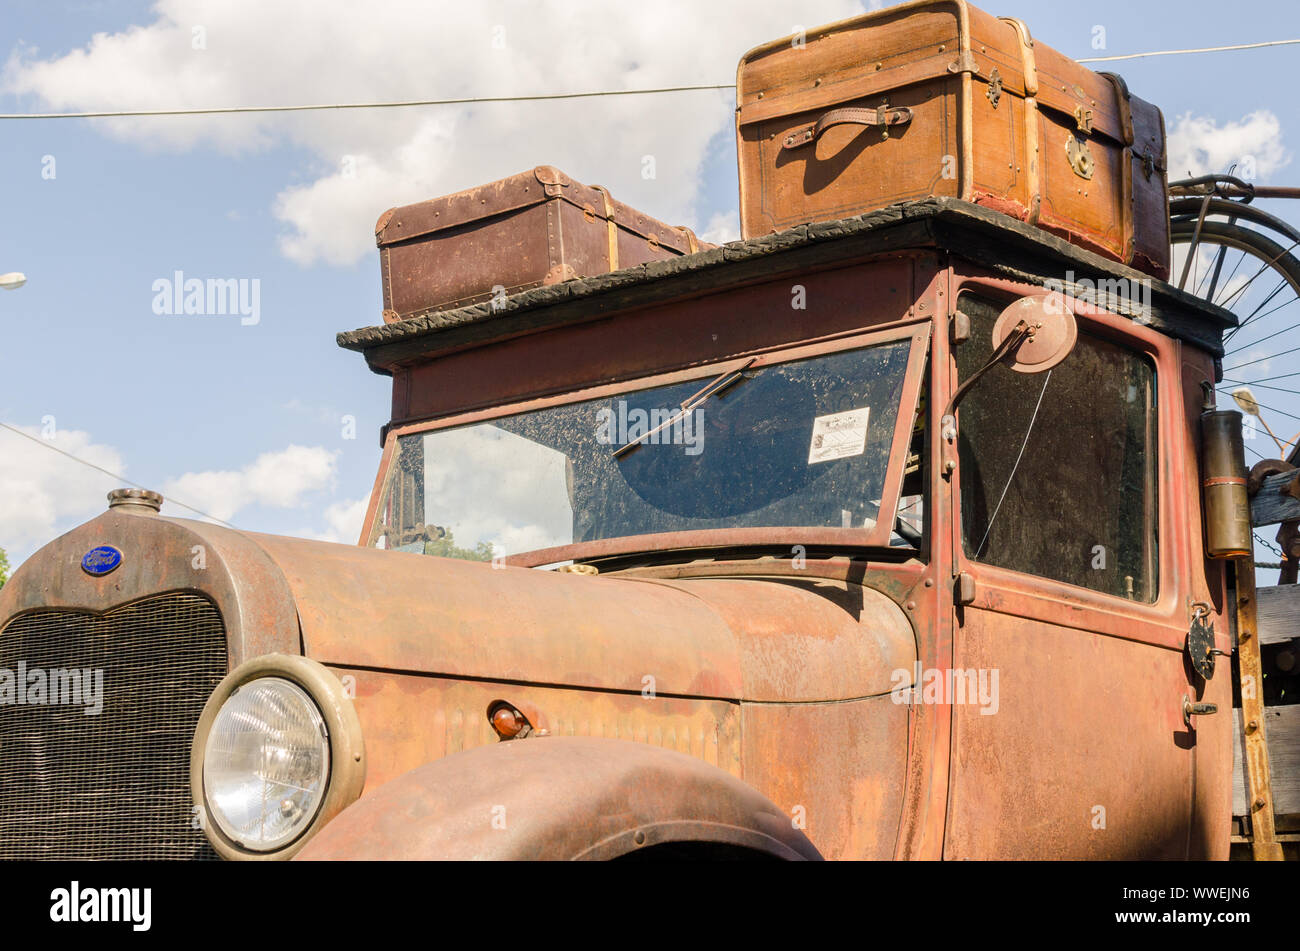 WROCLAW, POLAND - August 11, 2019: USA cars show - Old rusty Ford truck pickup 1930 - 1931-1939 with stylish vintage suitcases on the roof. Stock Photo